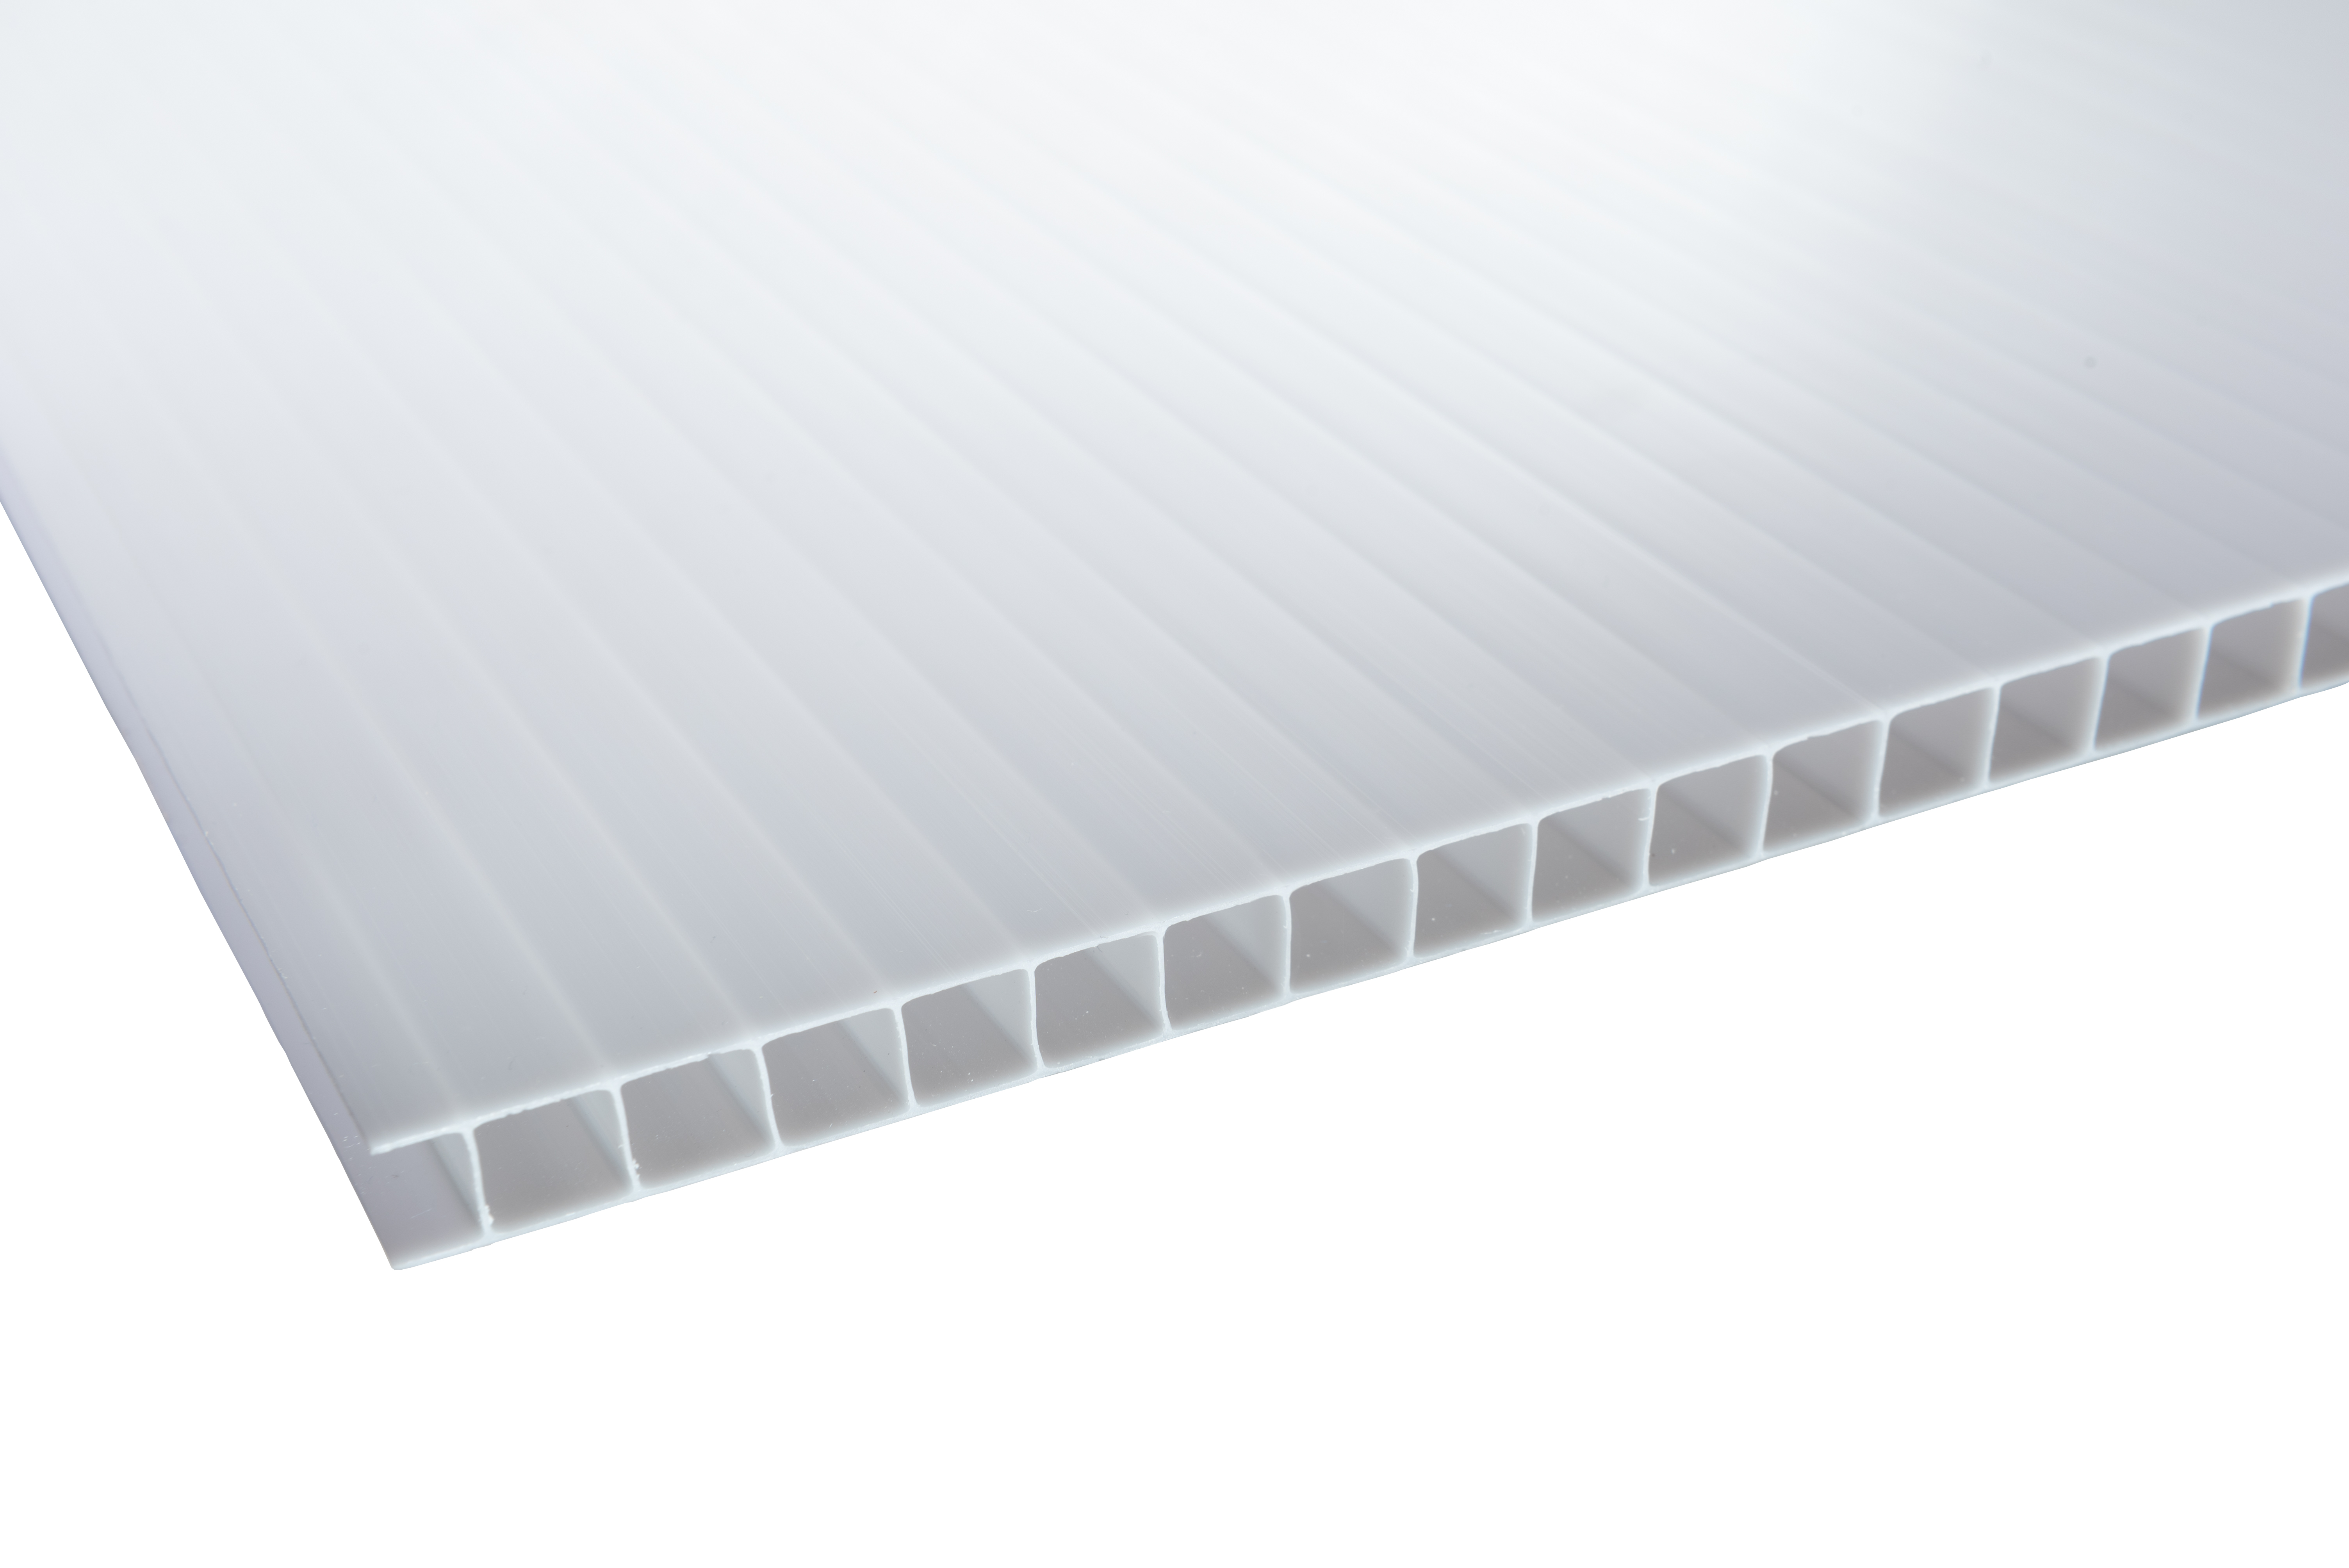 Image of 10mm Opal Multiwall Polycarbonate Sheet - 2500 x 1050mm